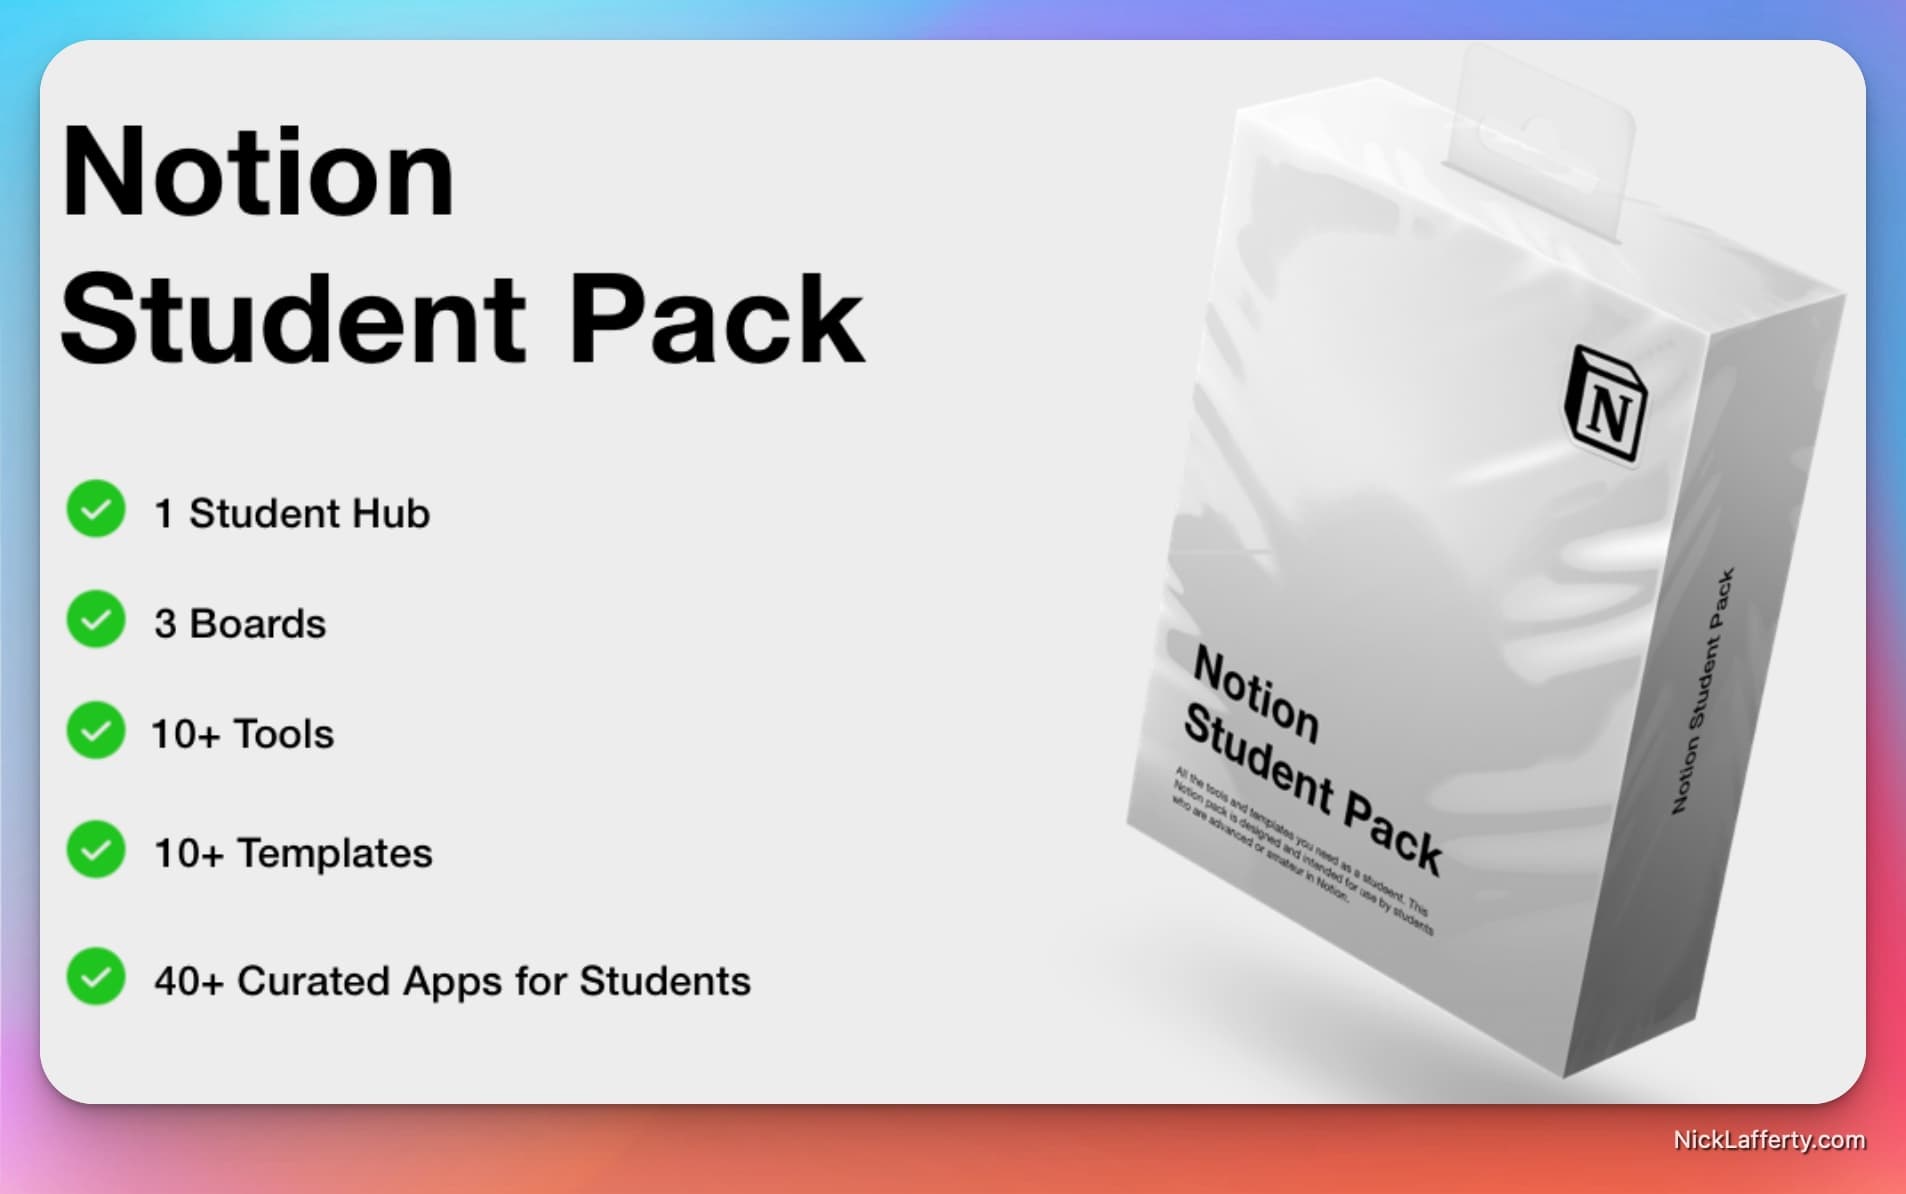 Notion Student Pack by Easlo